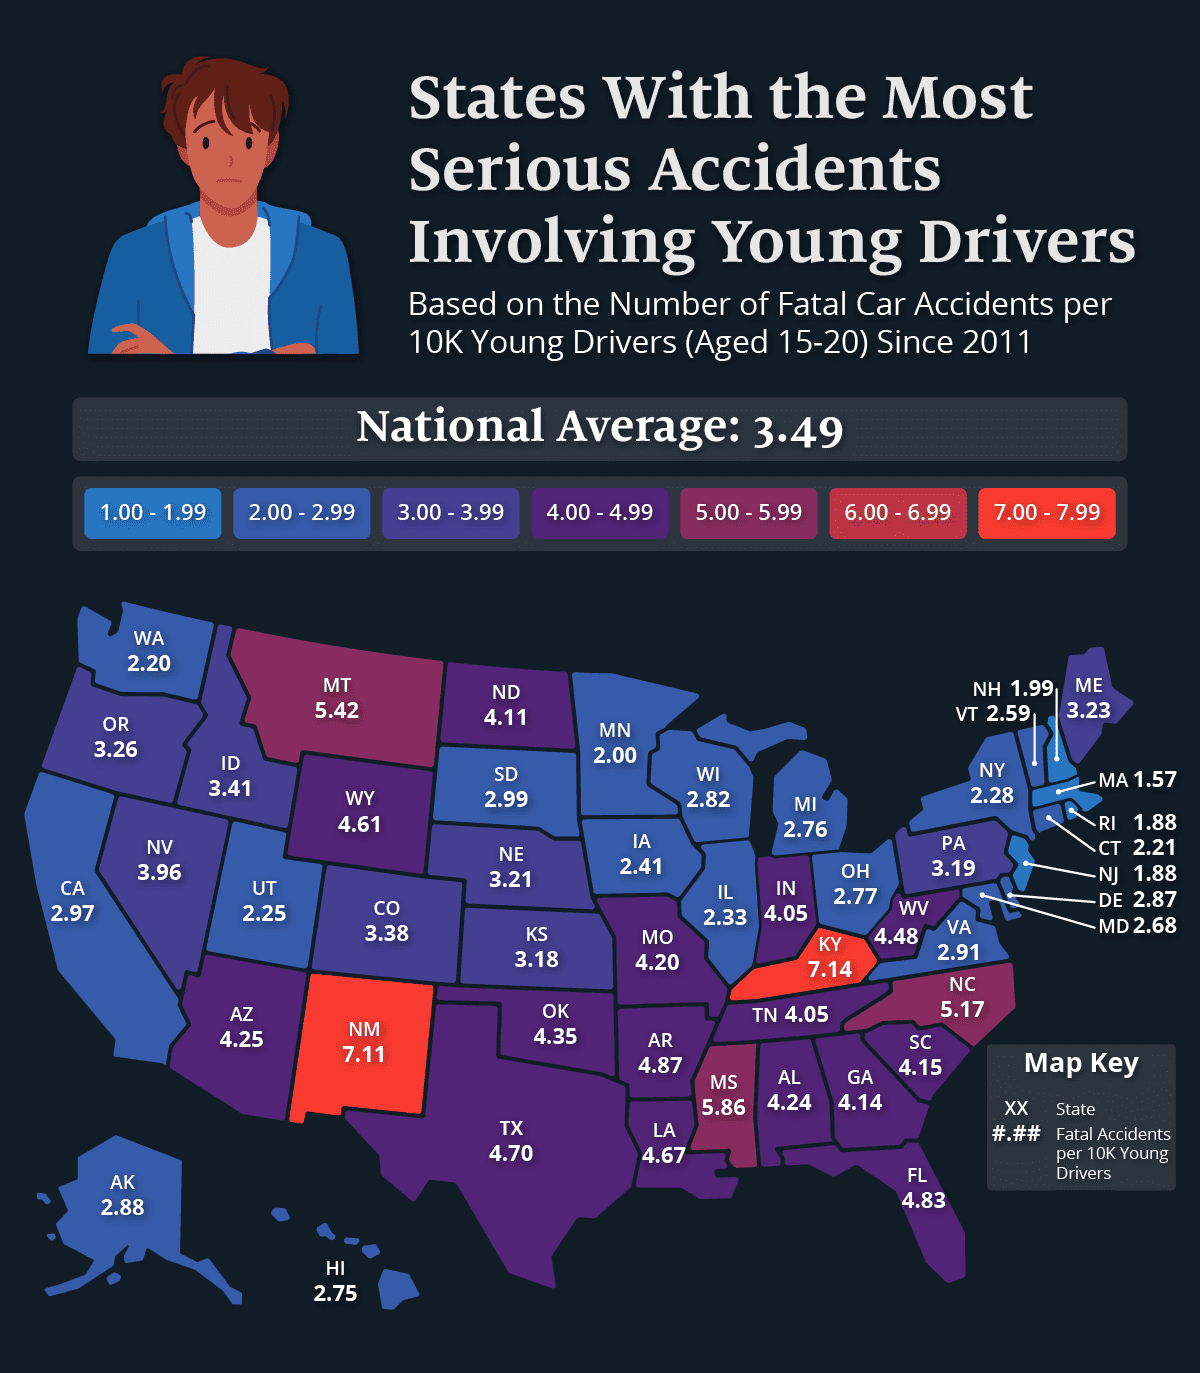 A U.S. map showing the states with the most fatal accidents involving young drivers